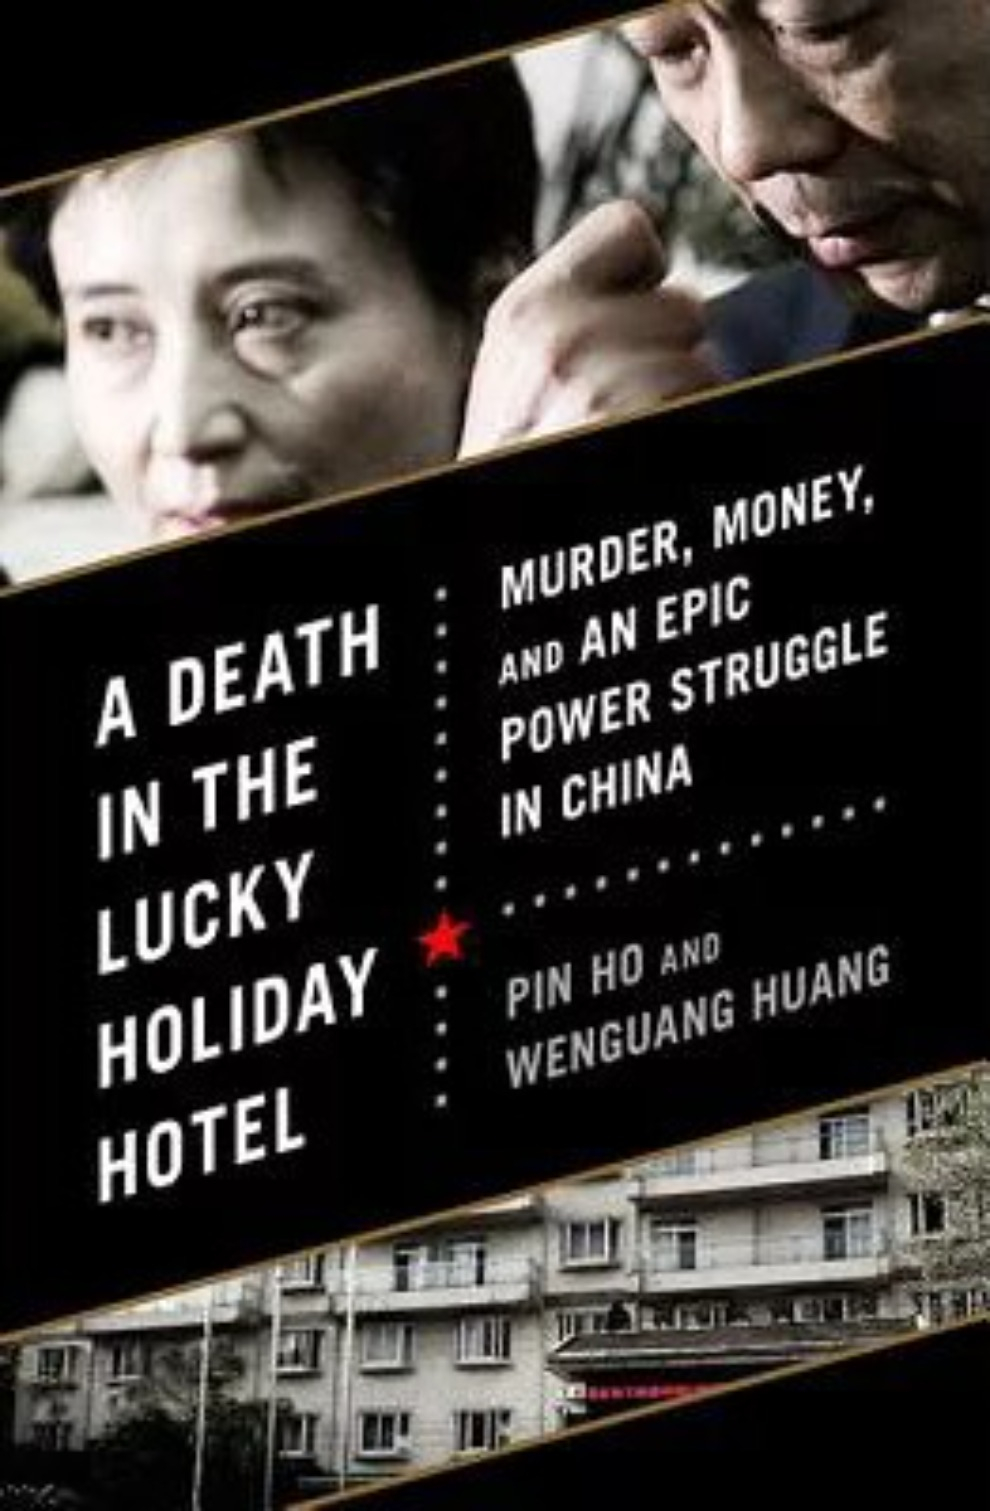 A Death in the Lucky Holiday Hotel by Pin Ho and Wenguang Huang